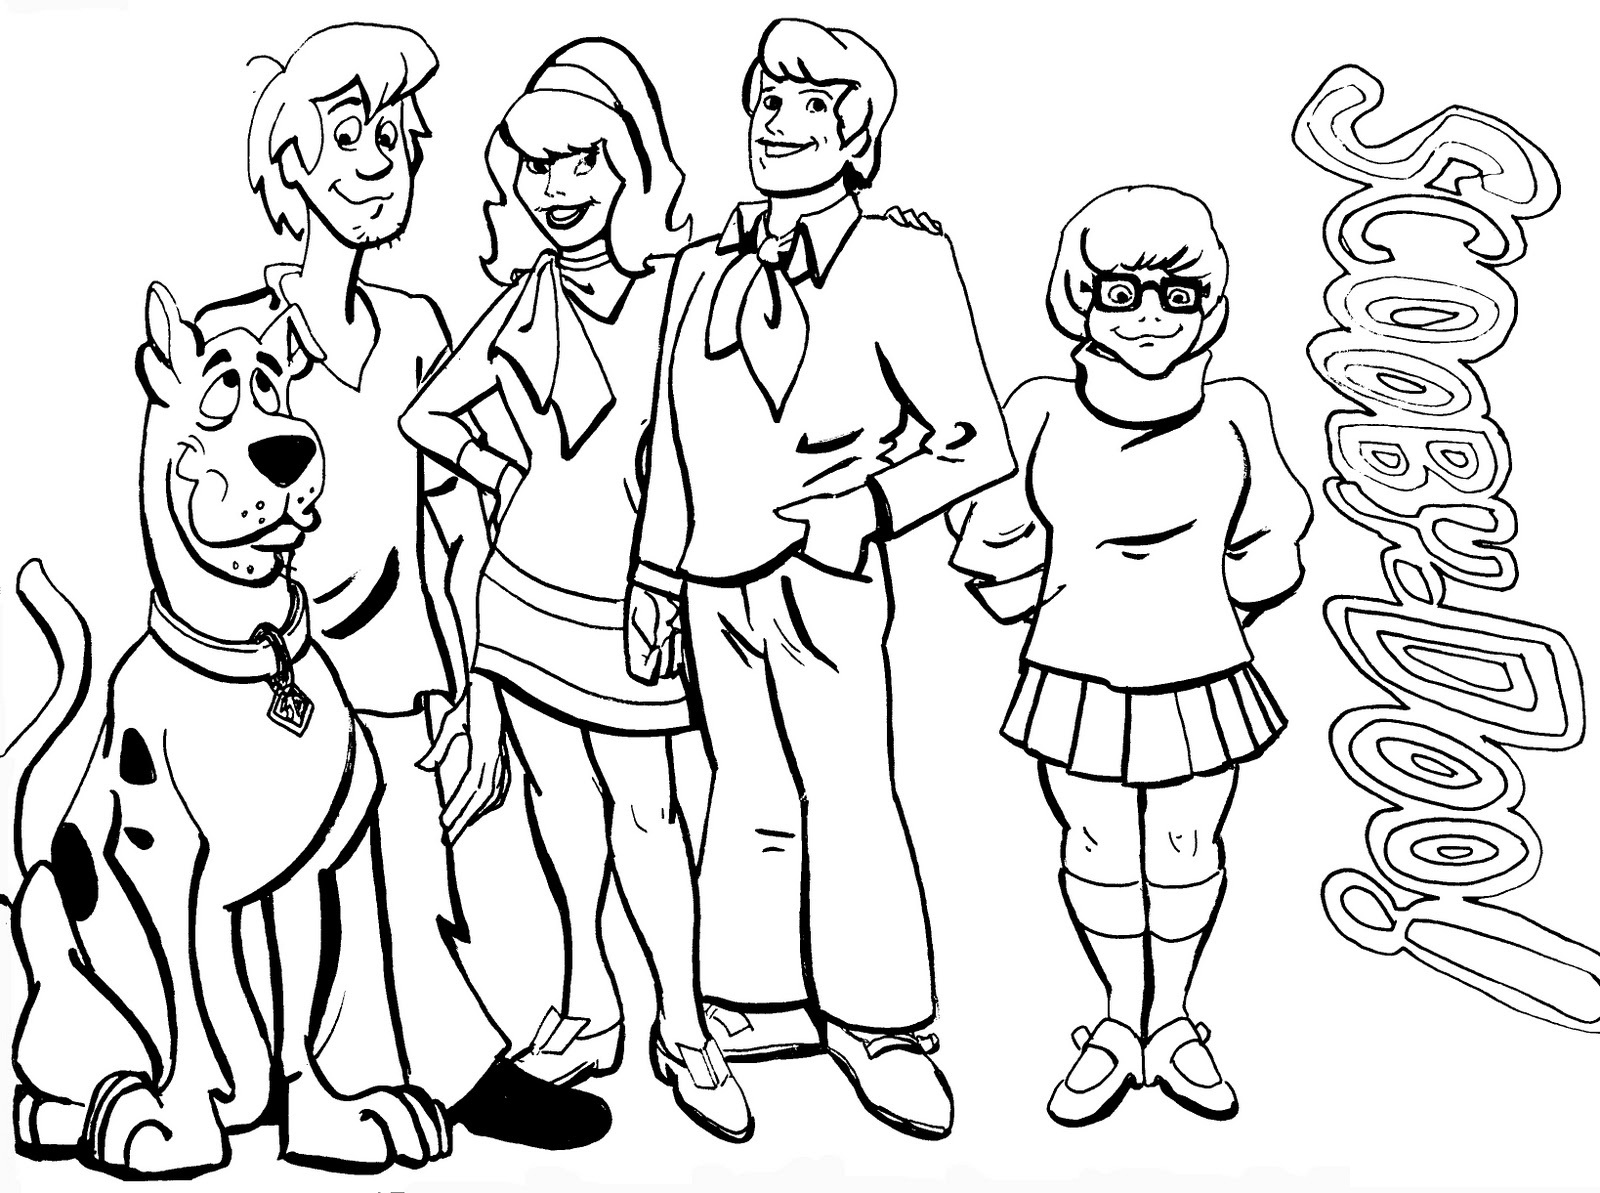 Collection of Scooby Doo Coloring Sheets.